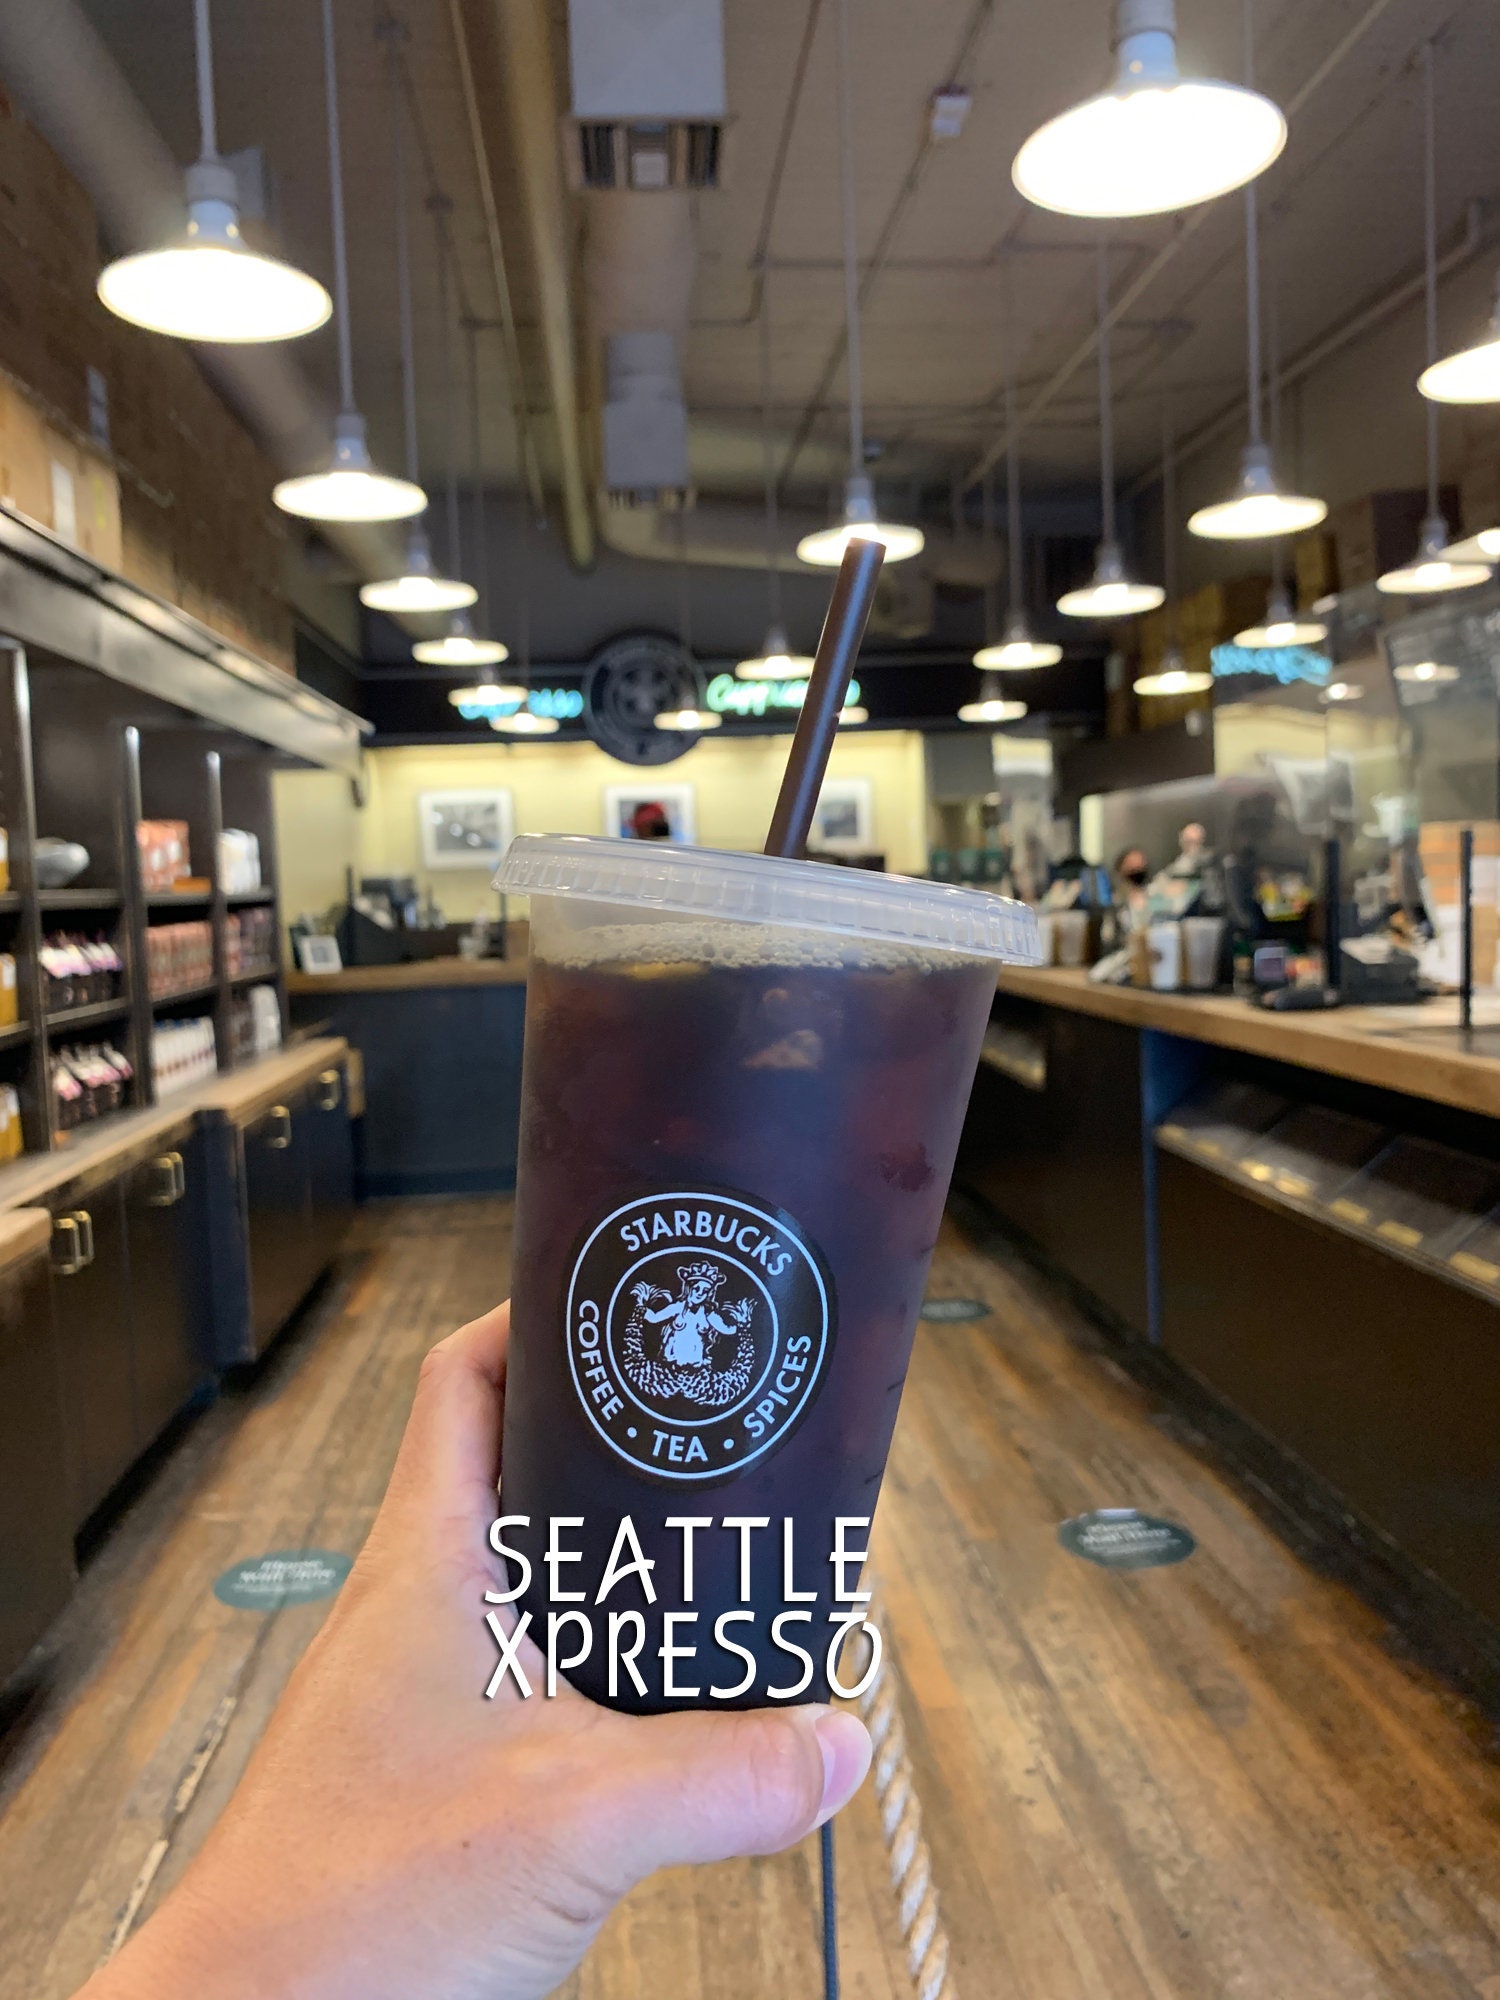 Starbucks Pike Place Market First Store Reusable Hot Cups with